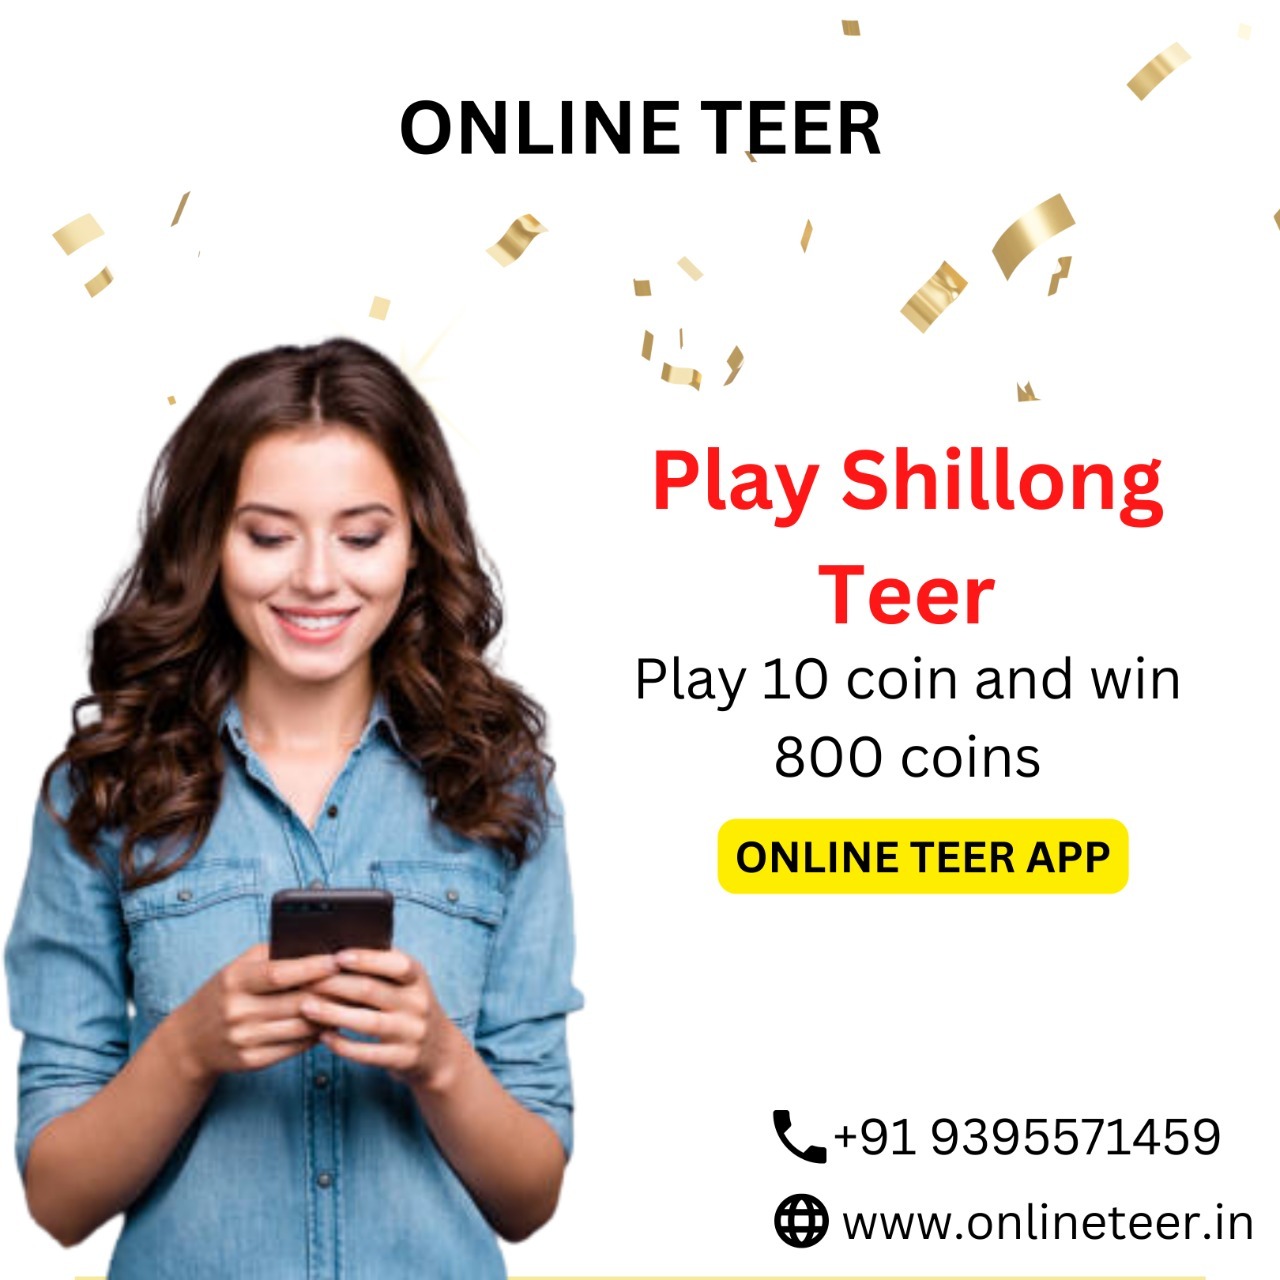 How to Play Online Teer Shillong  